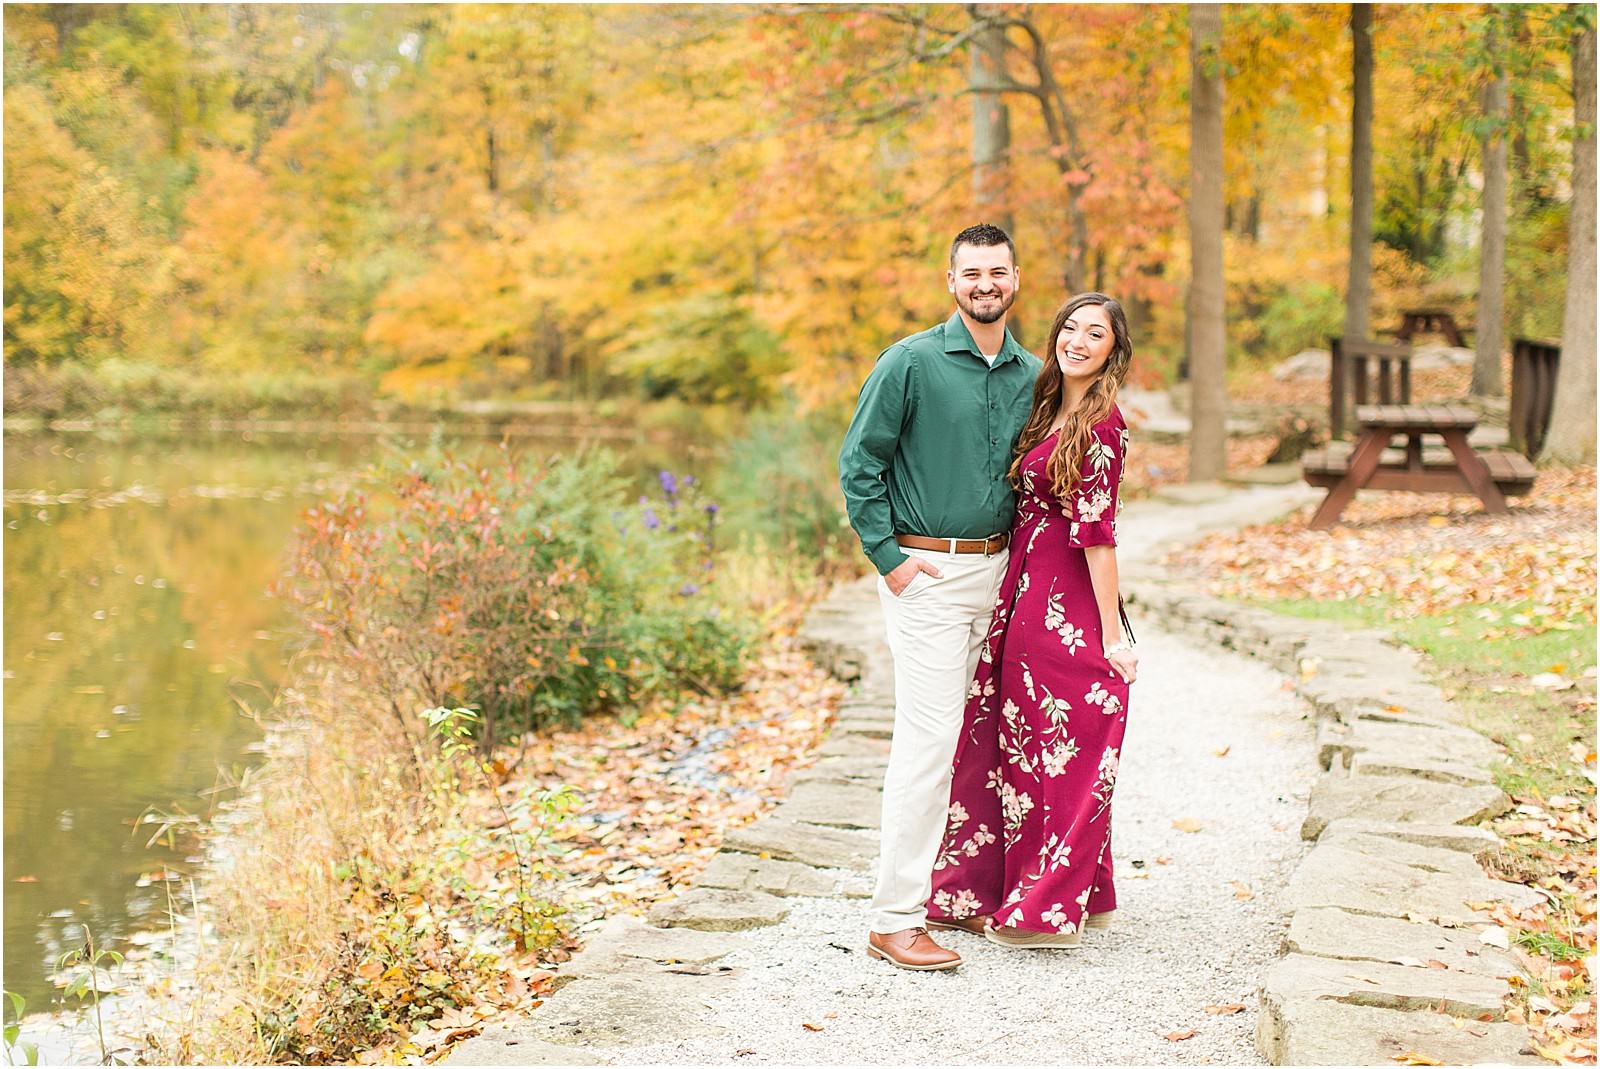 A Fall Oliver Winery Engagement Session | Sally and Andrew | Bret and Brandie Photography 0018.jpg